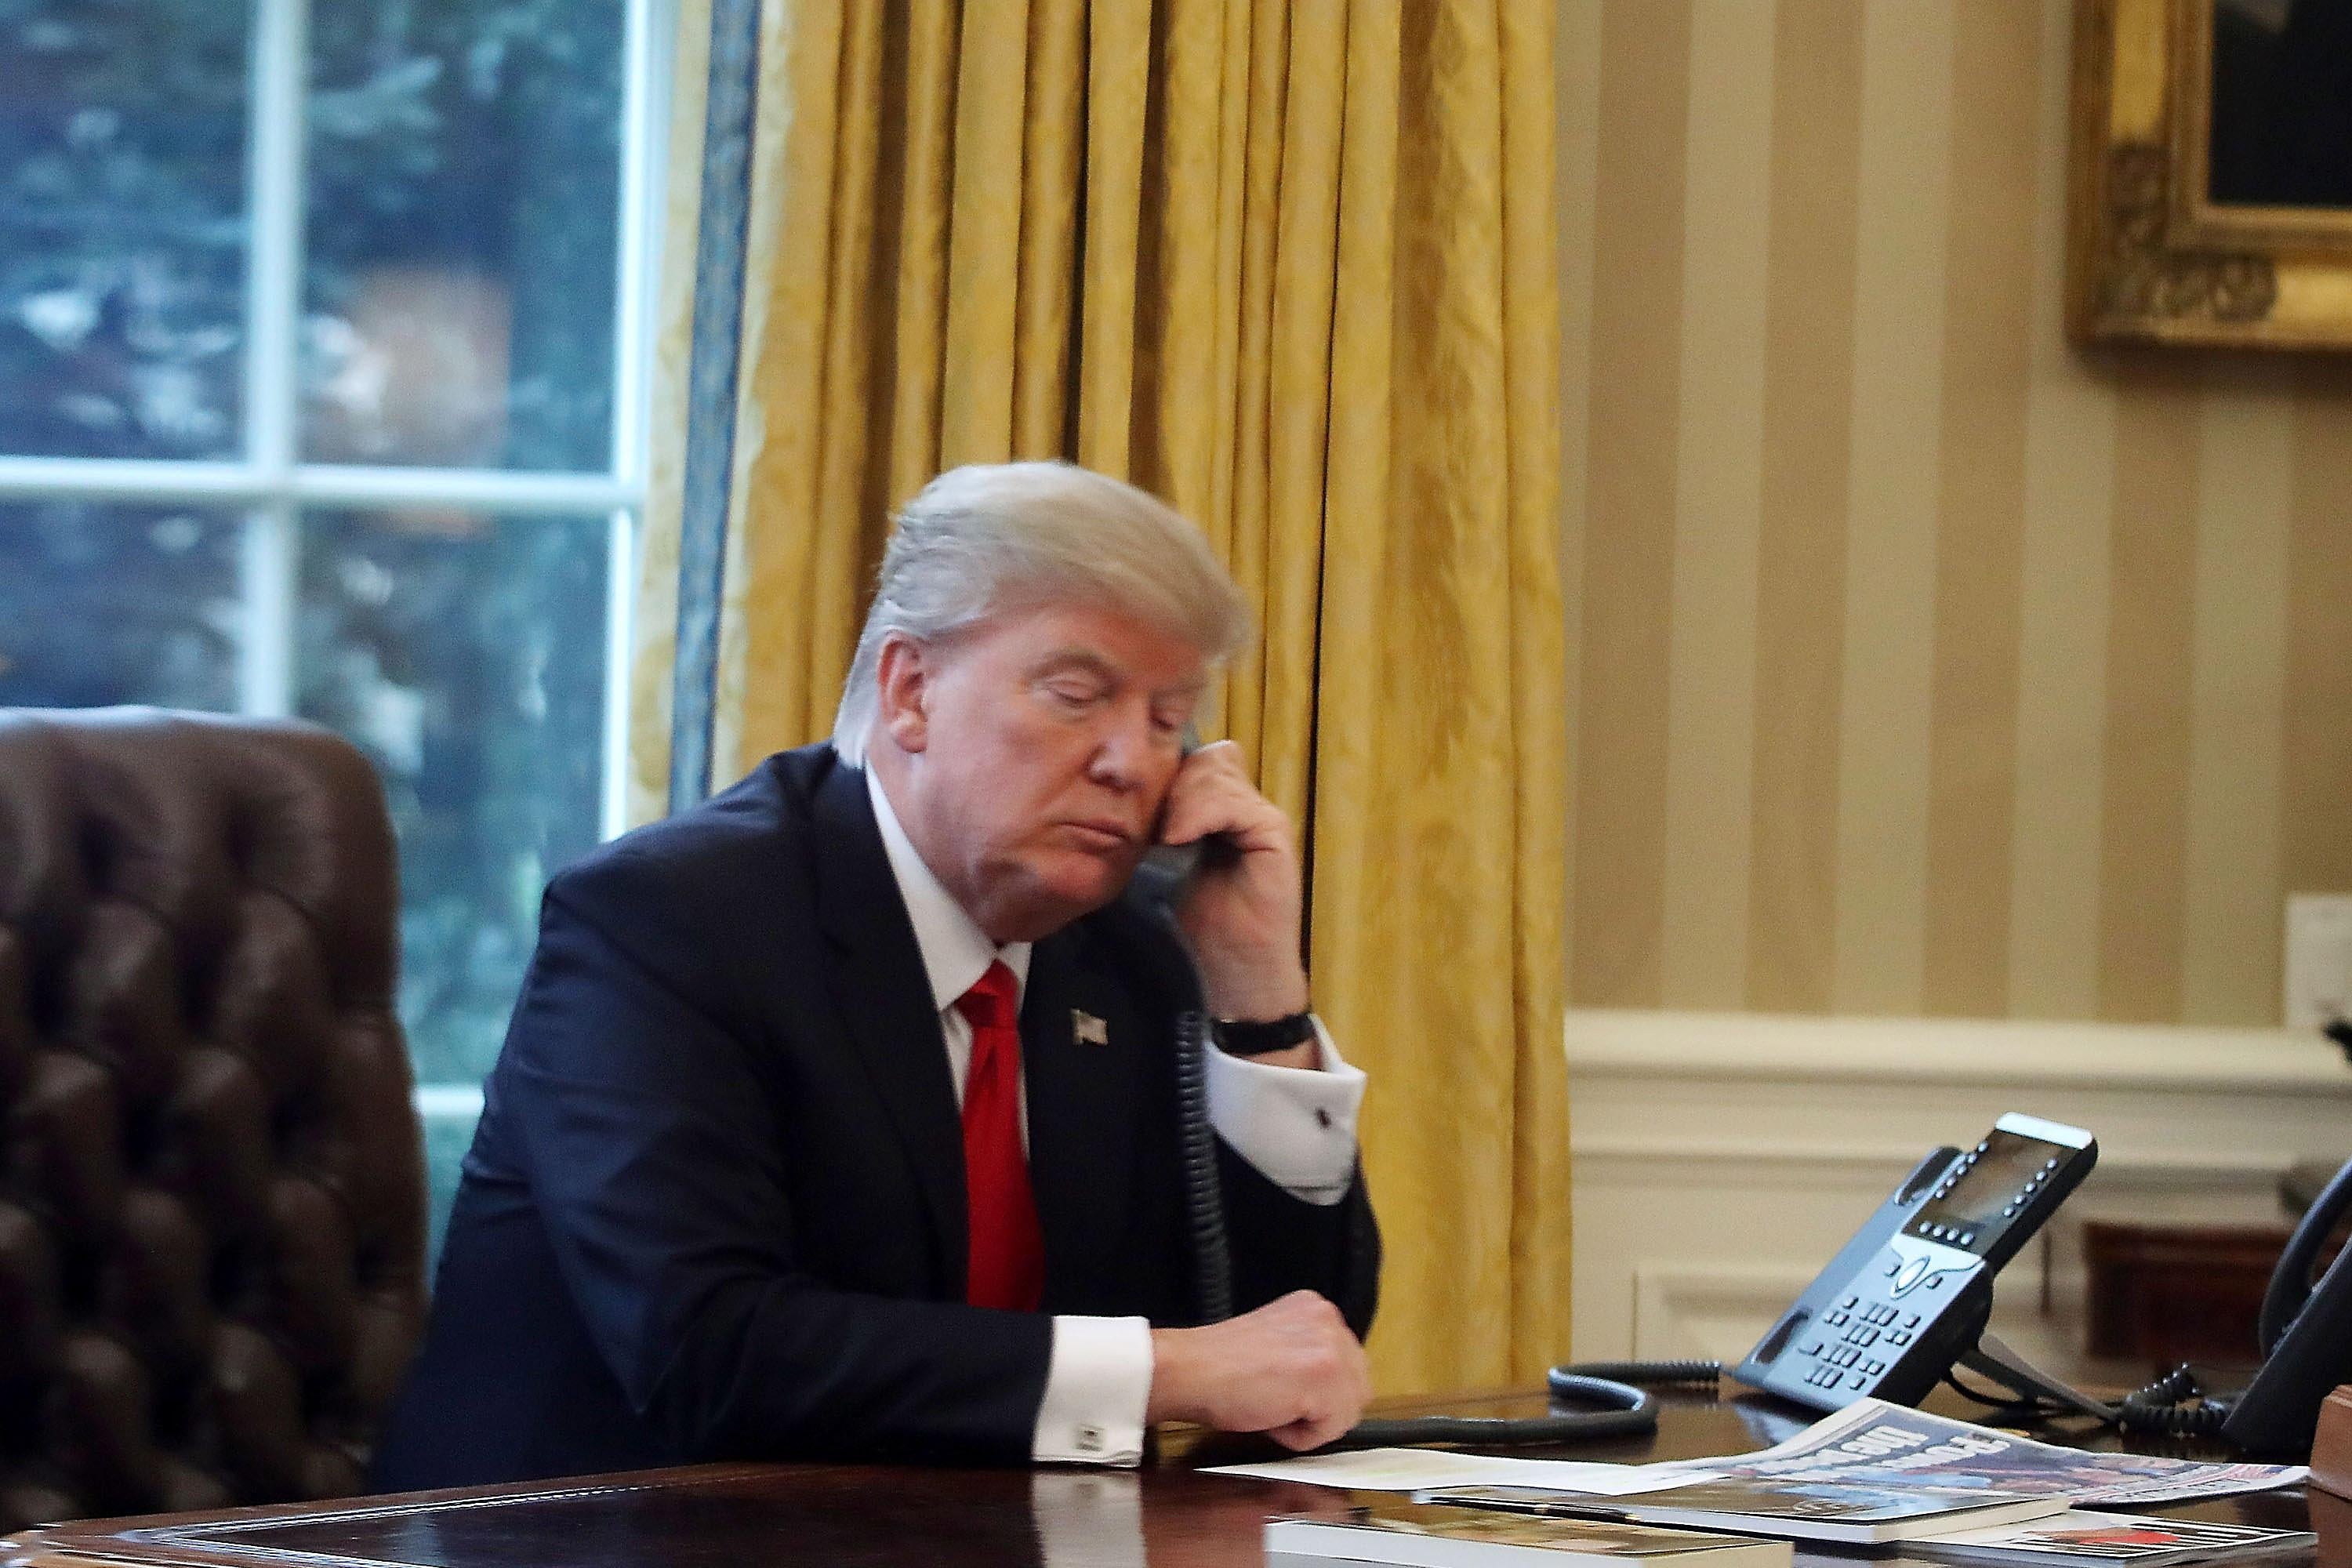 WASHINGTON, DC - JANUARY 29:  President Donald Trump is seen through a window speaking on the phone with King of Saudi Arabia, Salman bin Abd al-Aziz Al Saud, in the Oval Office of the White House, January 29, 2017 in Washington, DC. On Sunday, President Trump is making several phone calls with world leaders from the Oval Office.  (Photo by Mark Wilson/Getty Images)